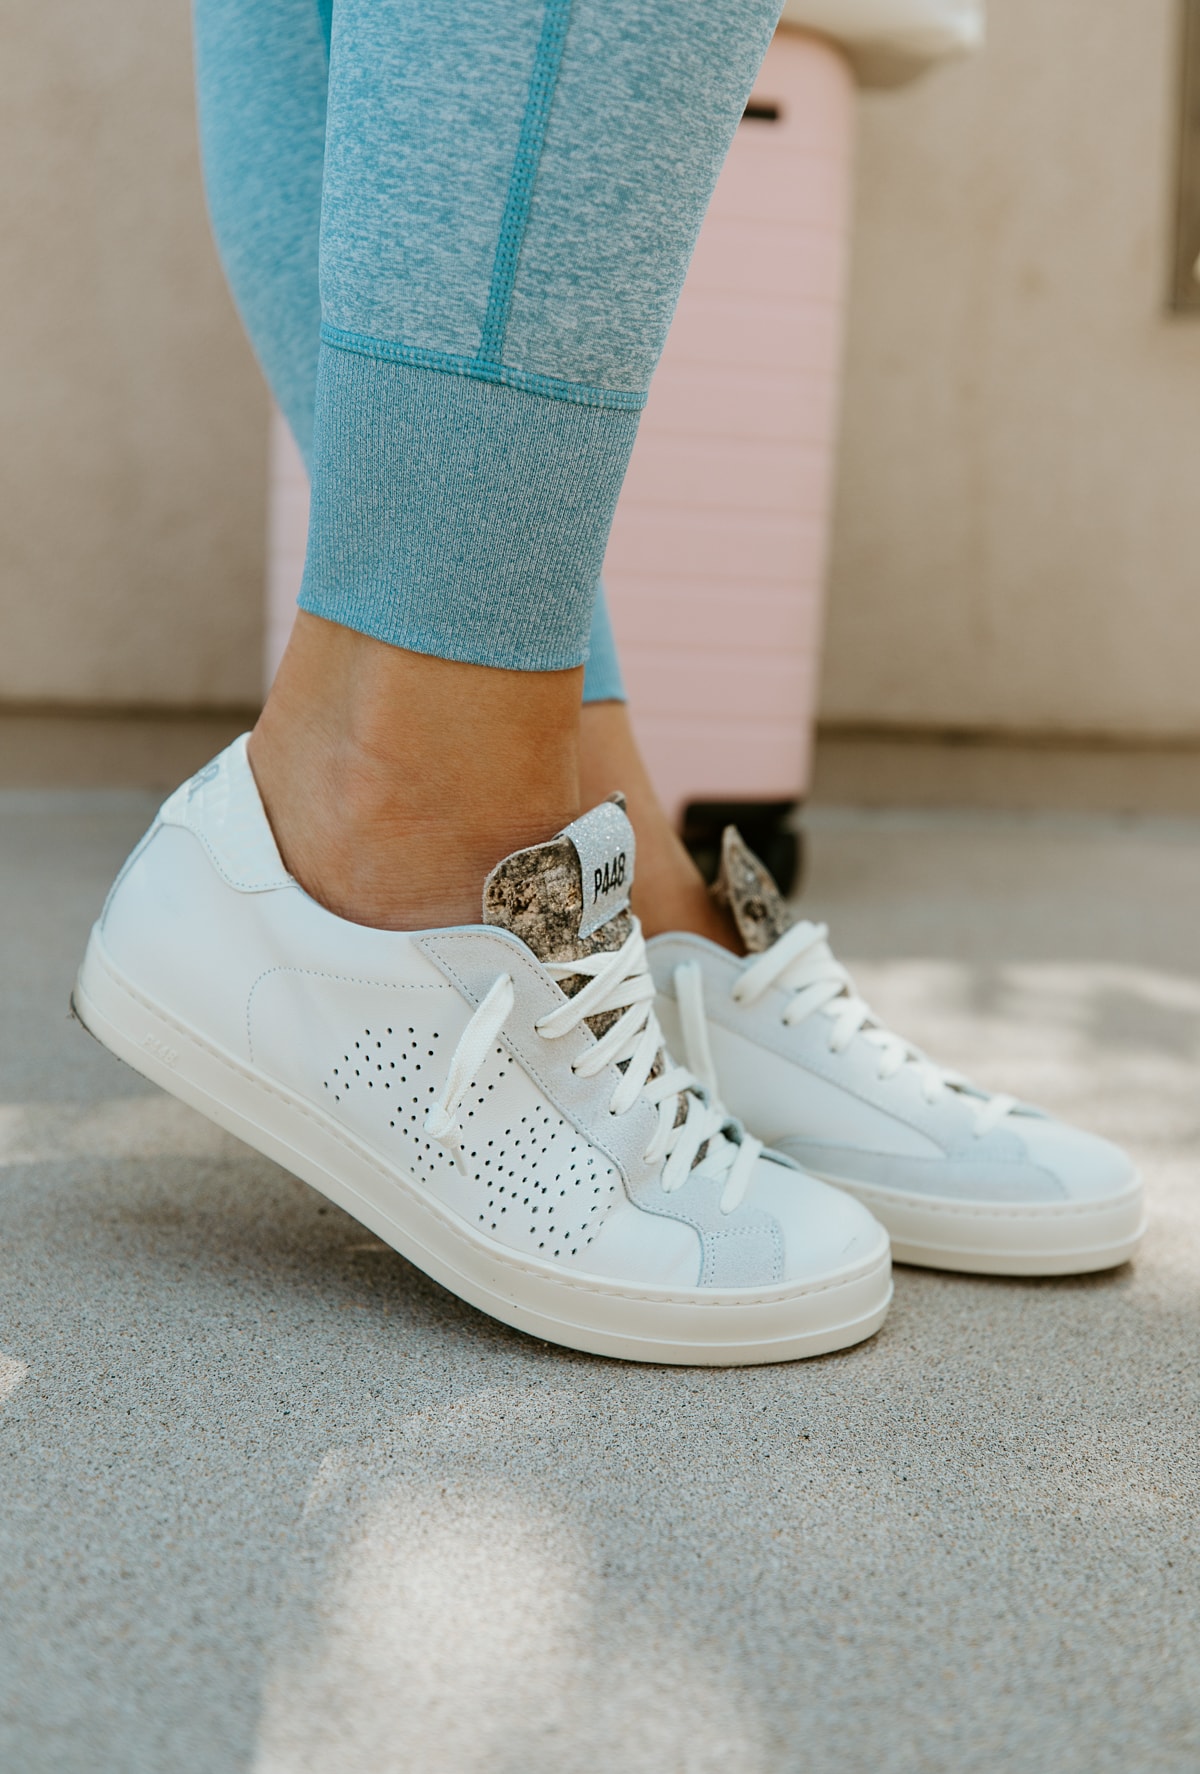 p448 sneakers nordstrom shoes sale